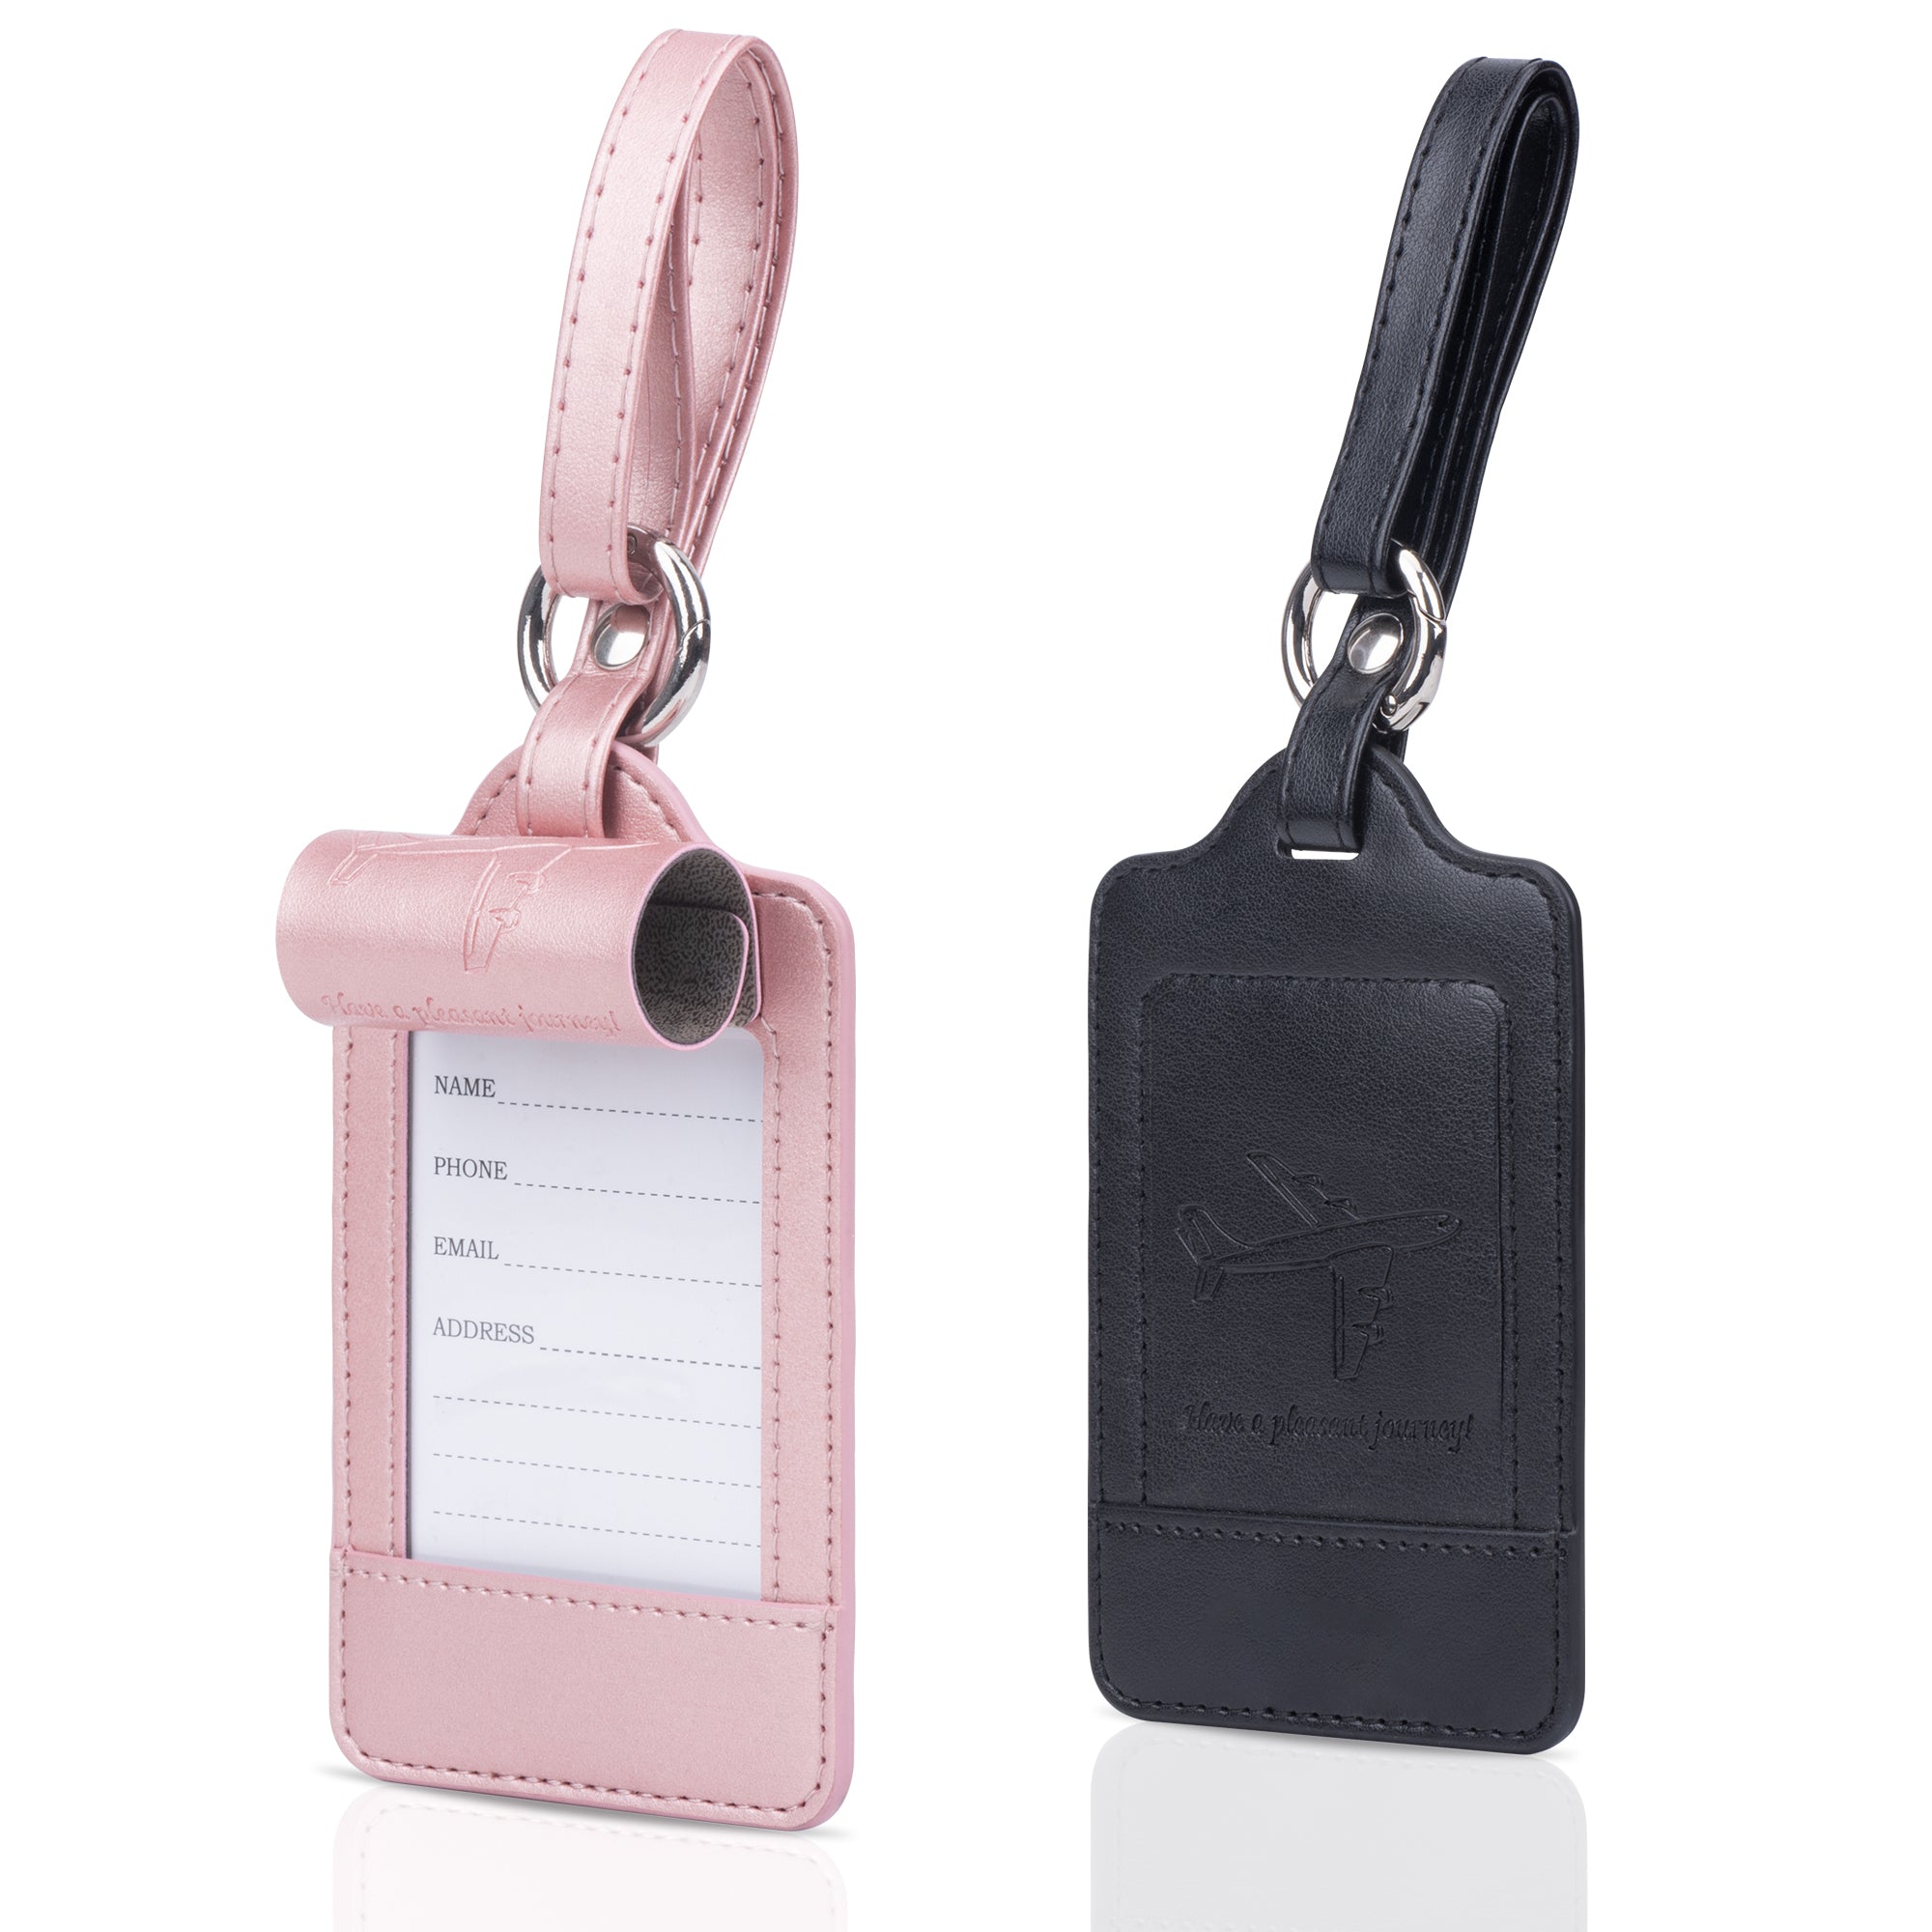 2 Pack Luggage Tags for Suitcases, PU Leather Baggage Address ID Tags  Luggage Name Labels Tags with Adjustable Strap and Privacy Protection Cover  for